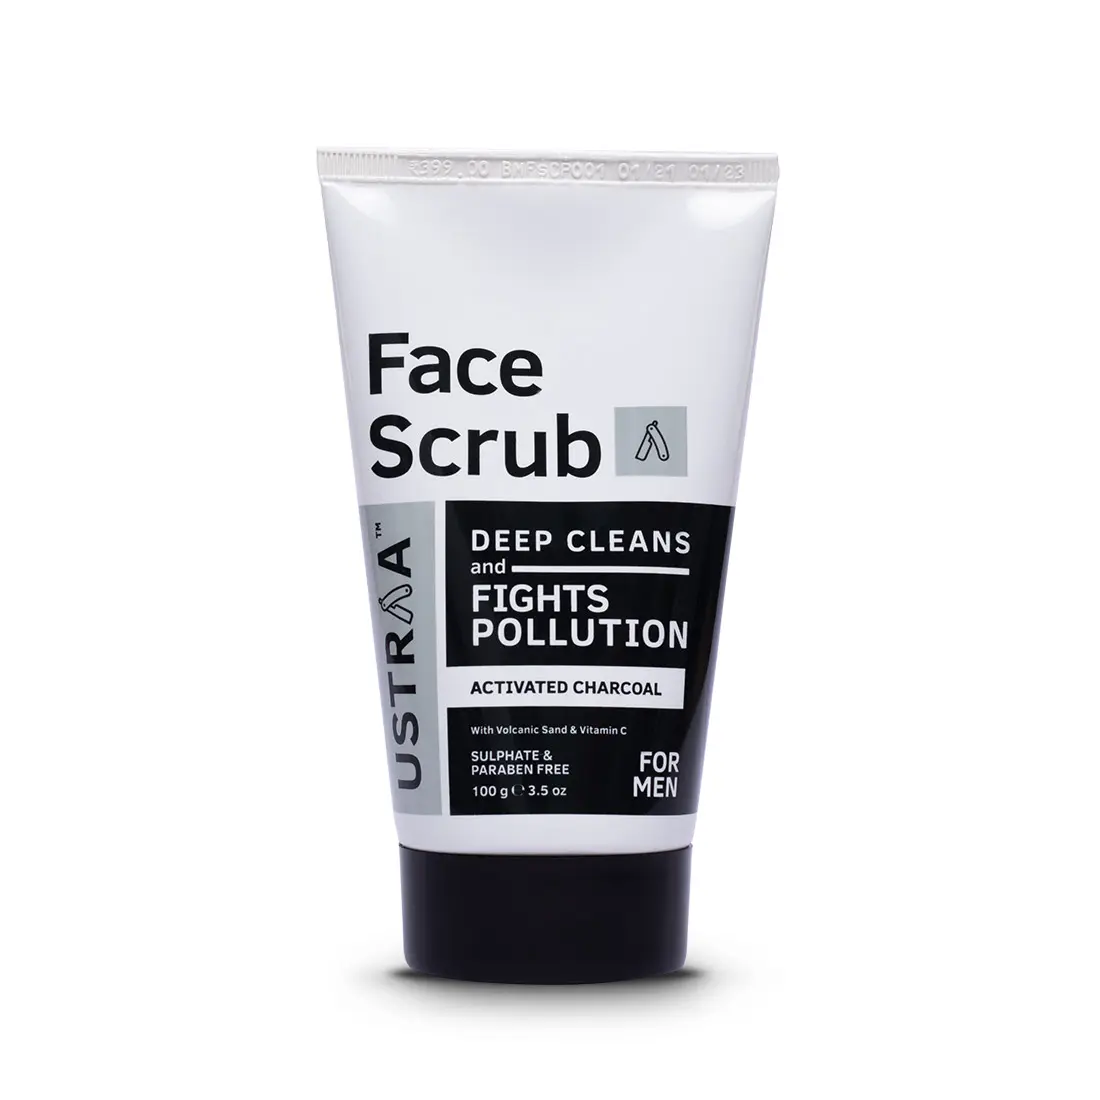 Ustraa activated charcoal face scrub 